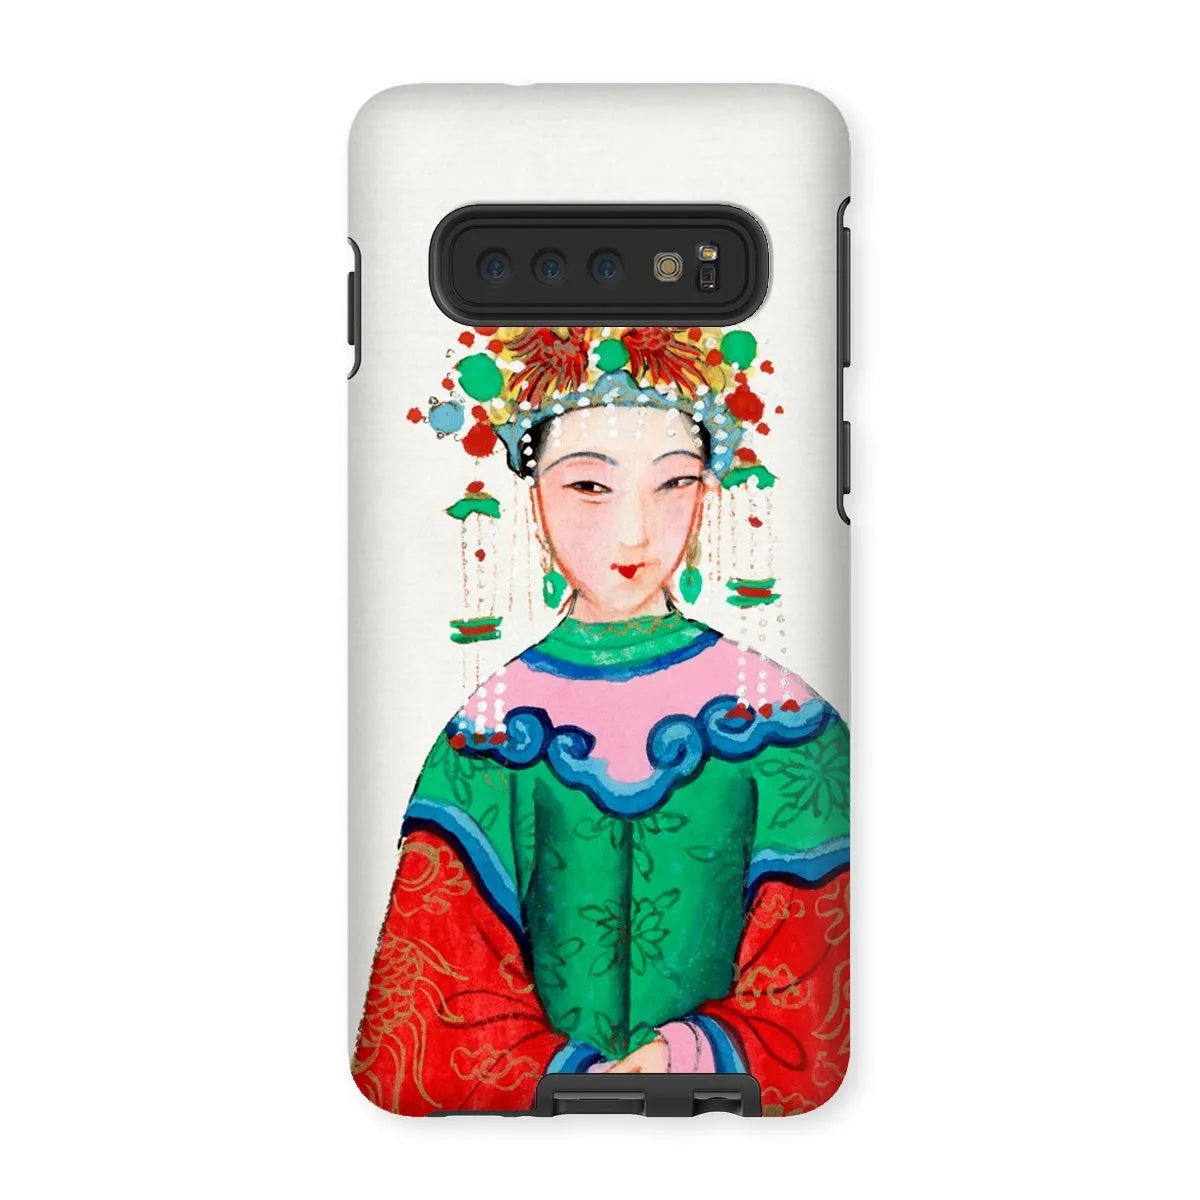 Imperial Princess - Chinese Aesthetic Painting Phone Case - Samsung Galaxy S10 / Matte - Mobile Phone Cases - Aesthetic